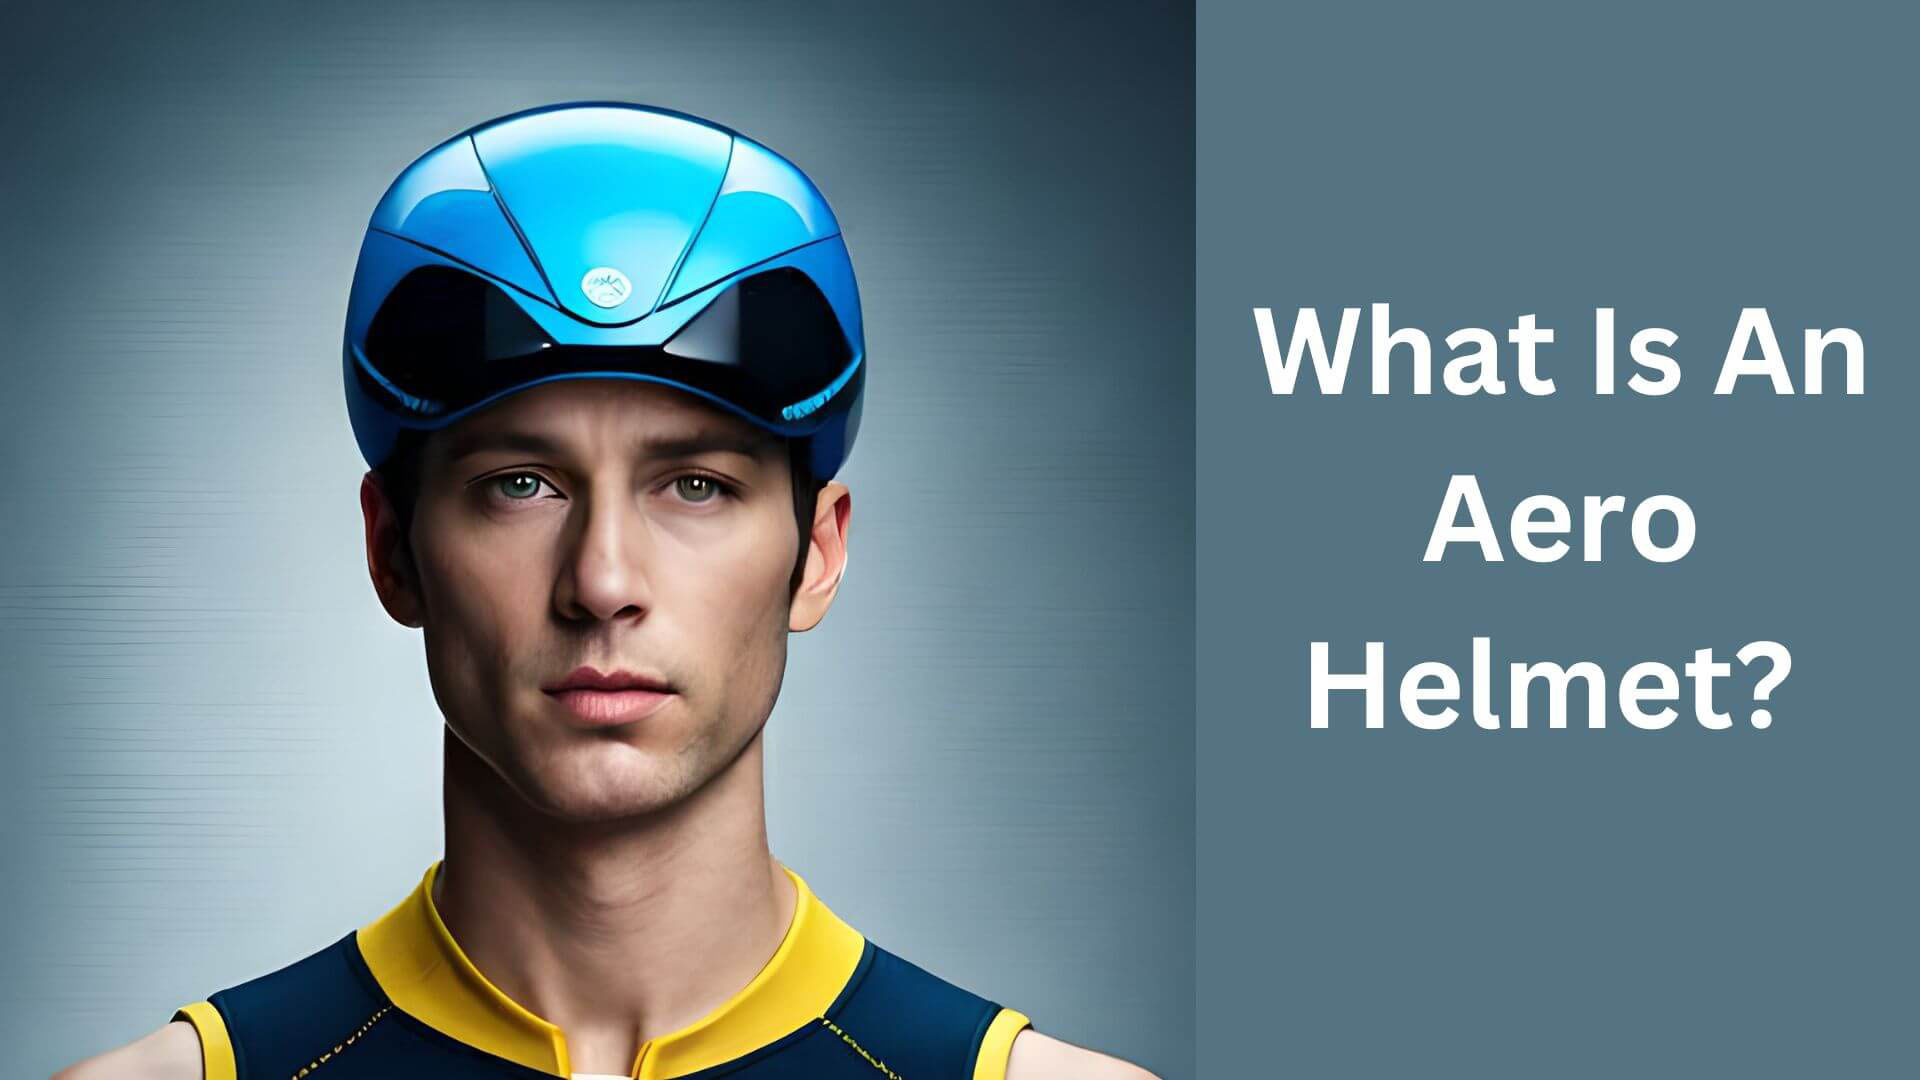 What Is An Aero Helmet? The Benefits and Features of a Lightweight Helmet